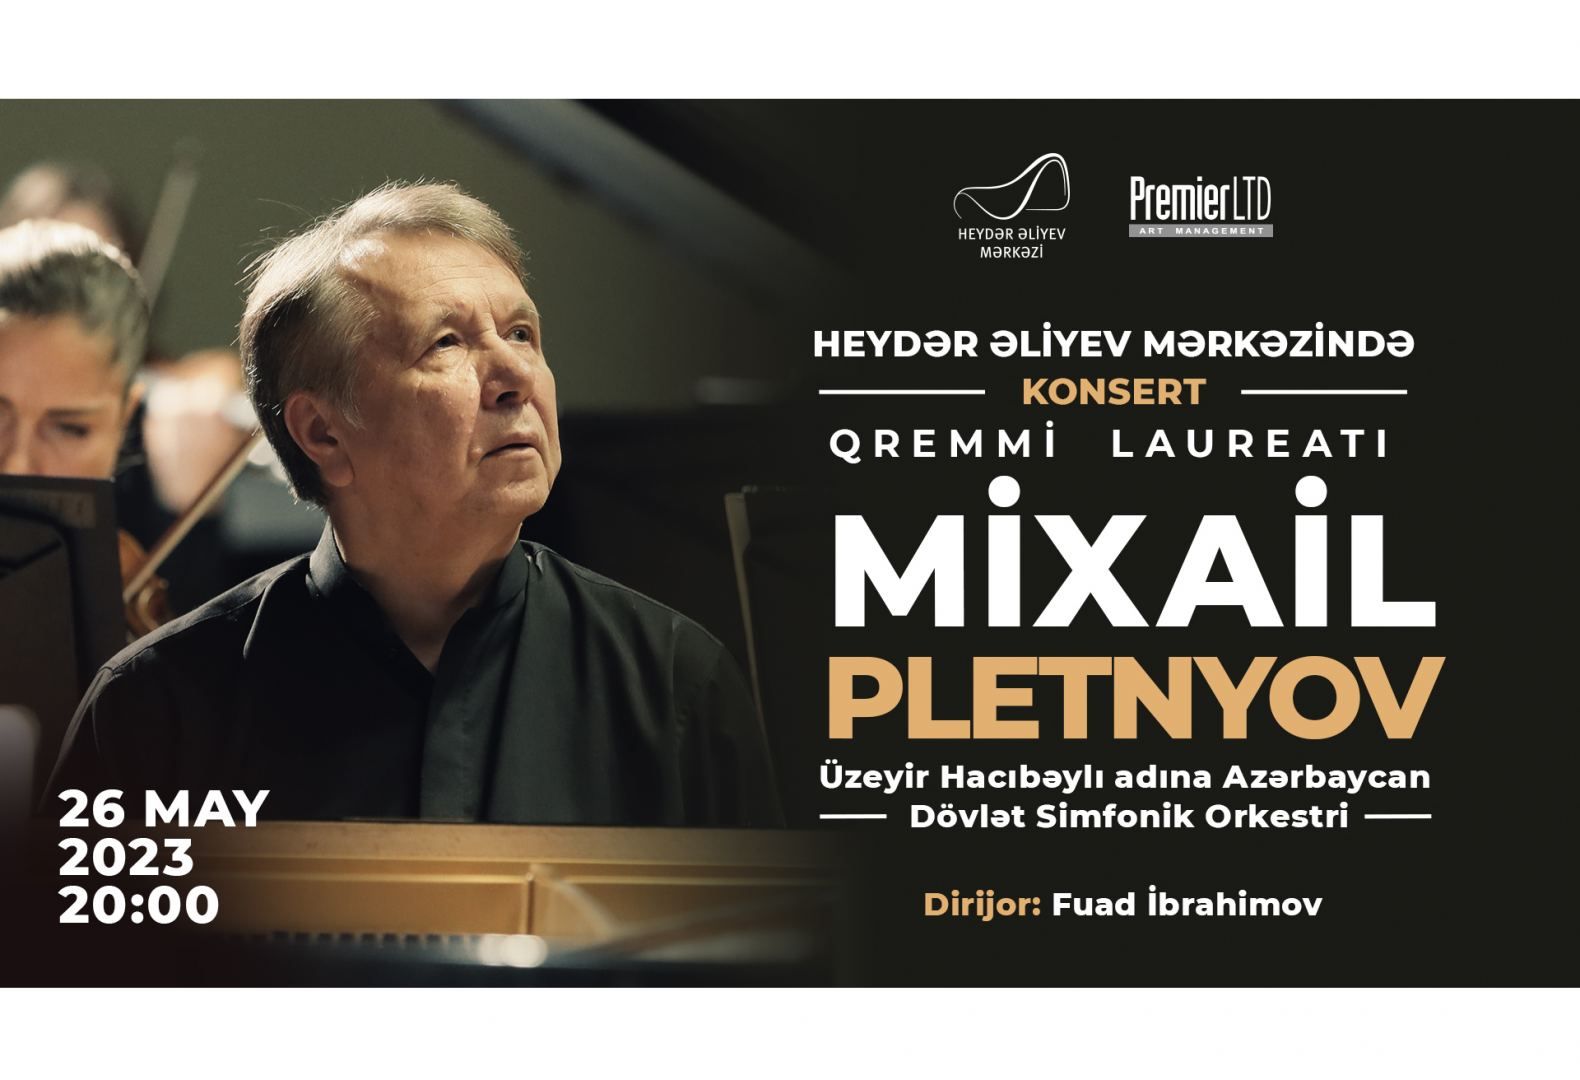 Renown pianist to give concert at Heydar Aliyev Center